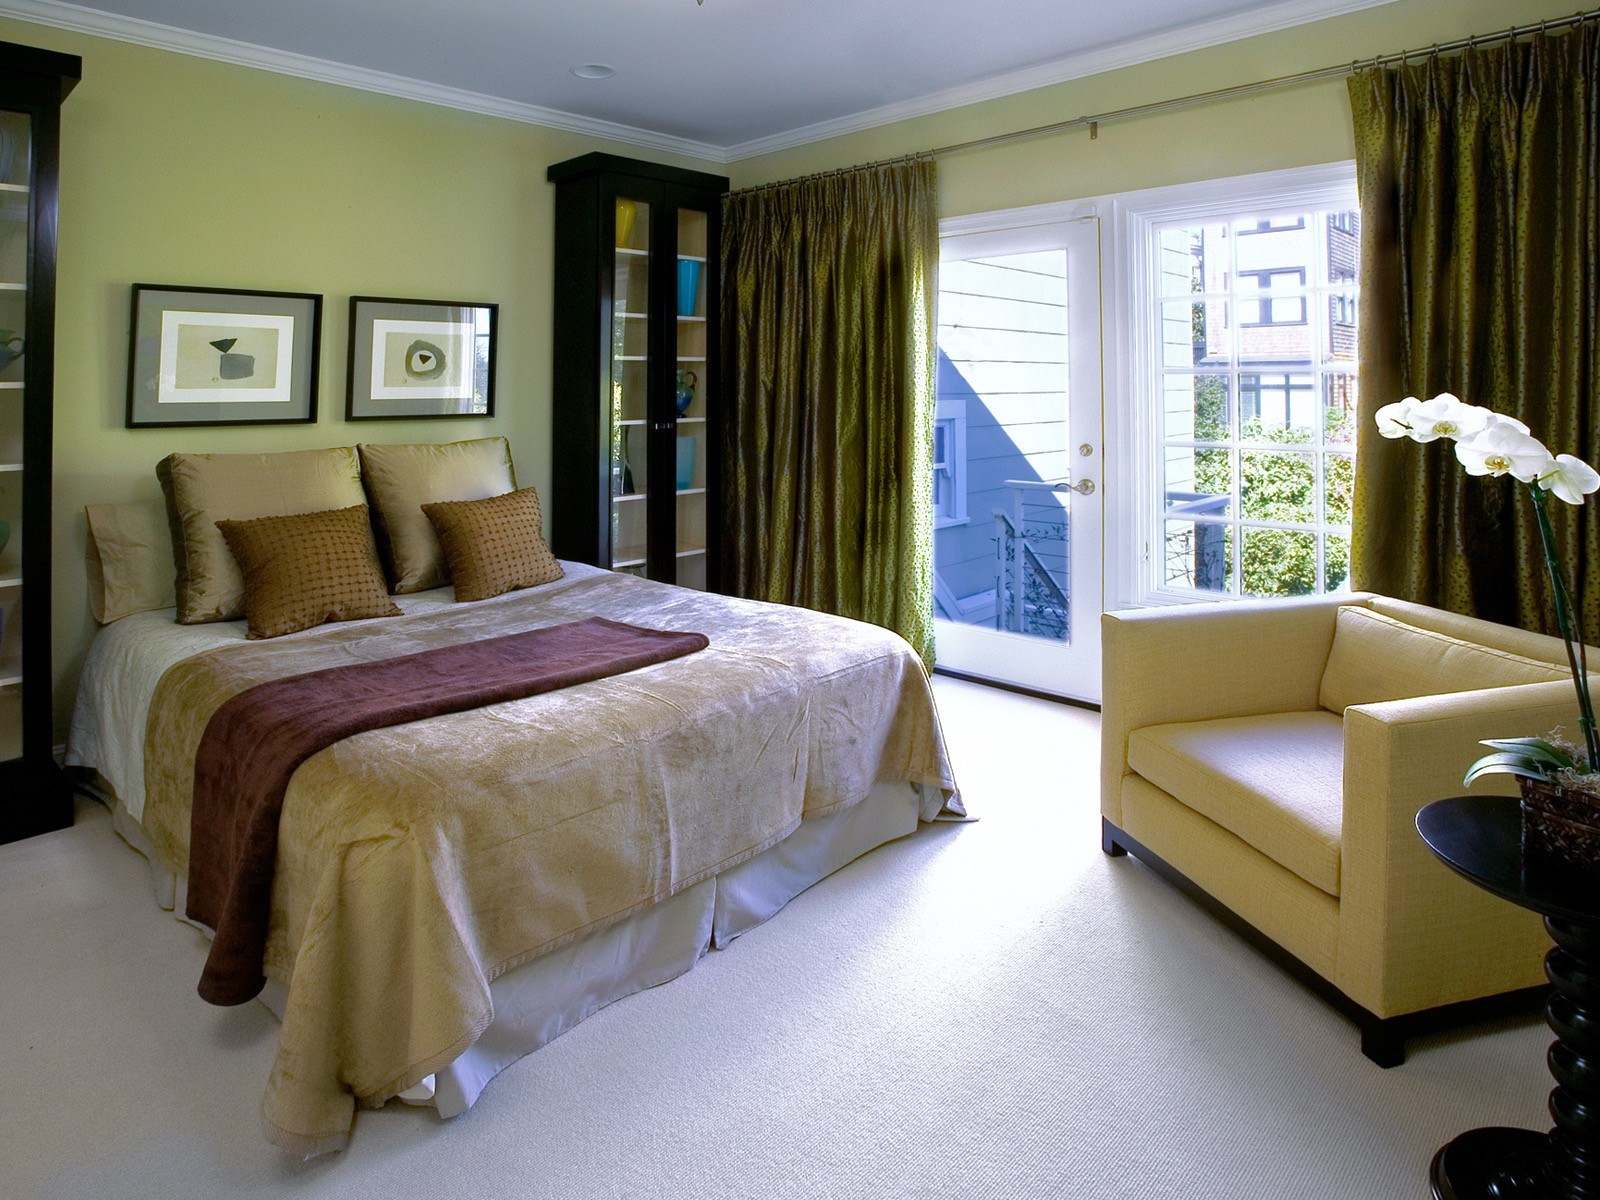 Modern Paint Color For Bedroom
 20 Lovely Bedroom Paint And Color Ideas